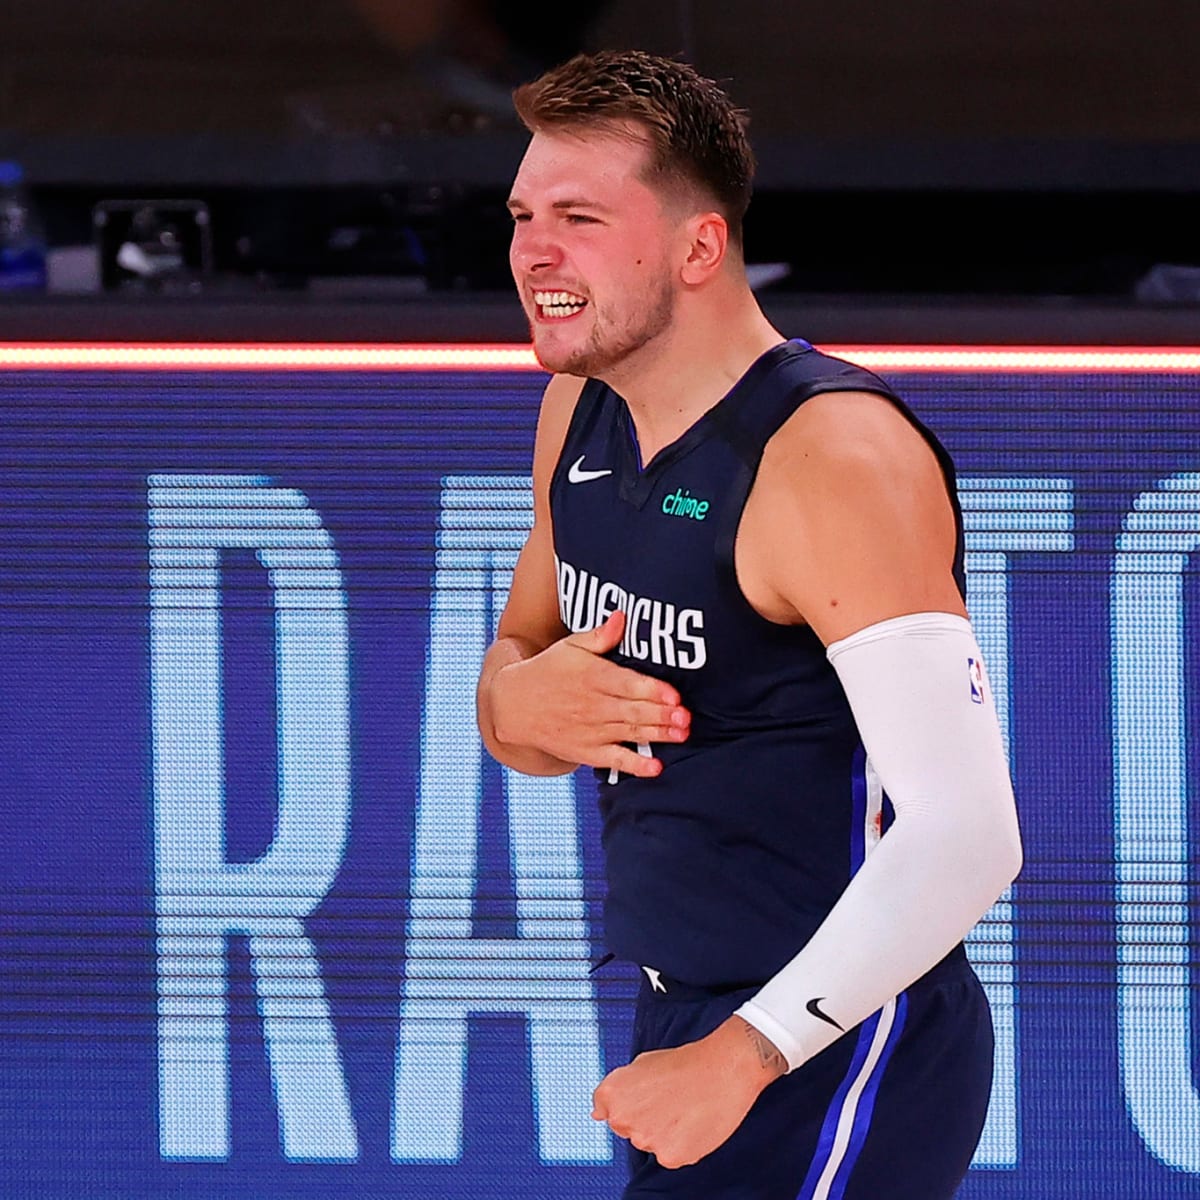 The big winner in this is Luka Doncic': Why the Mavs are exactly